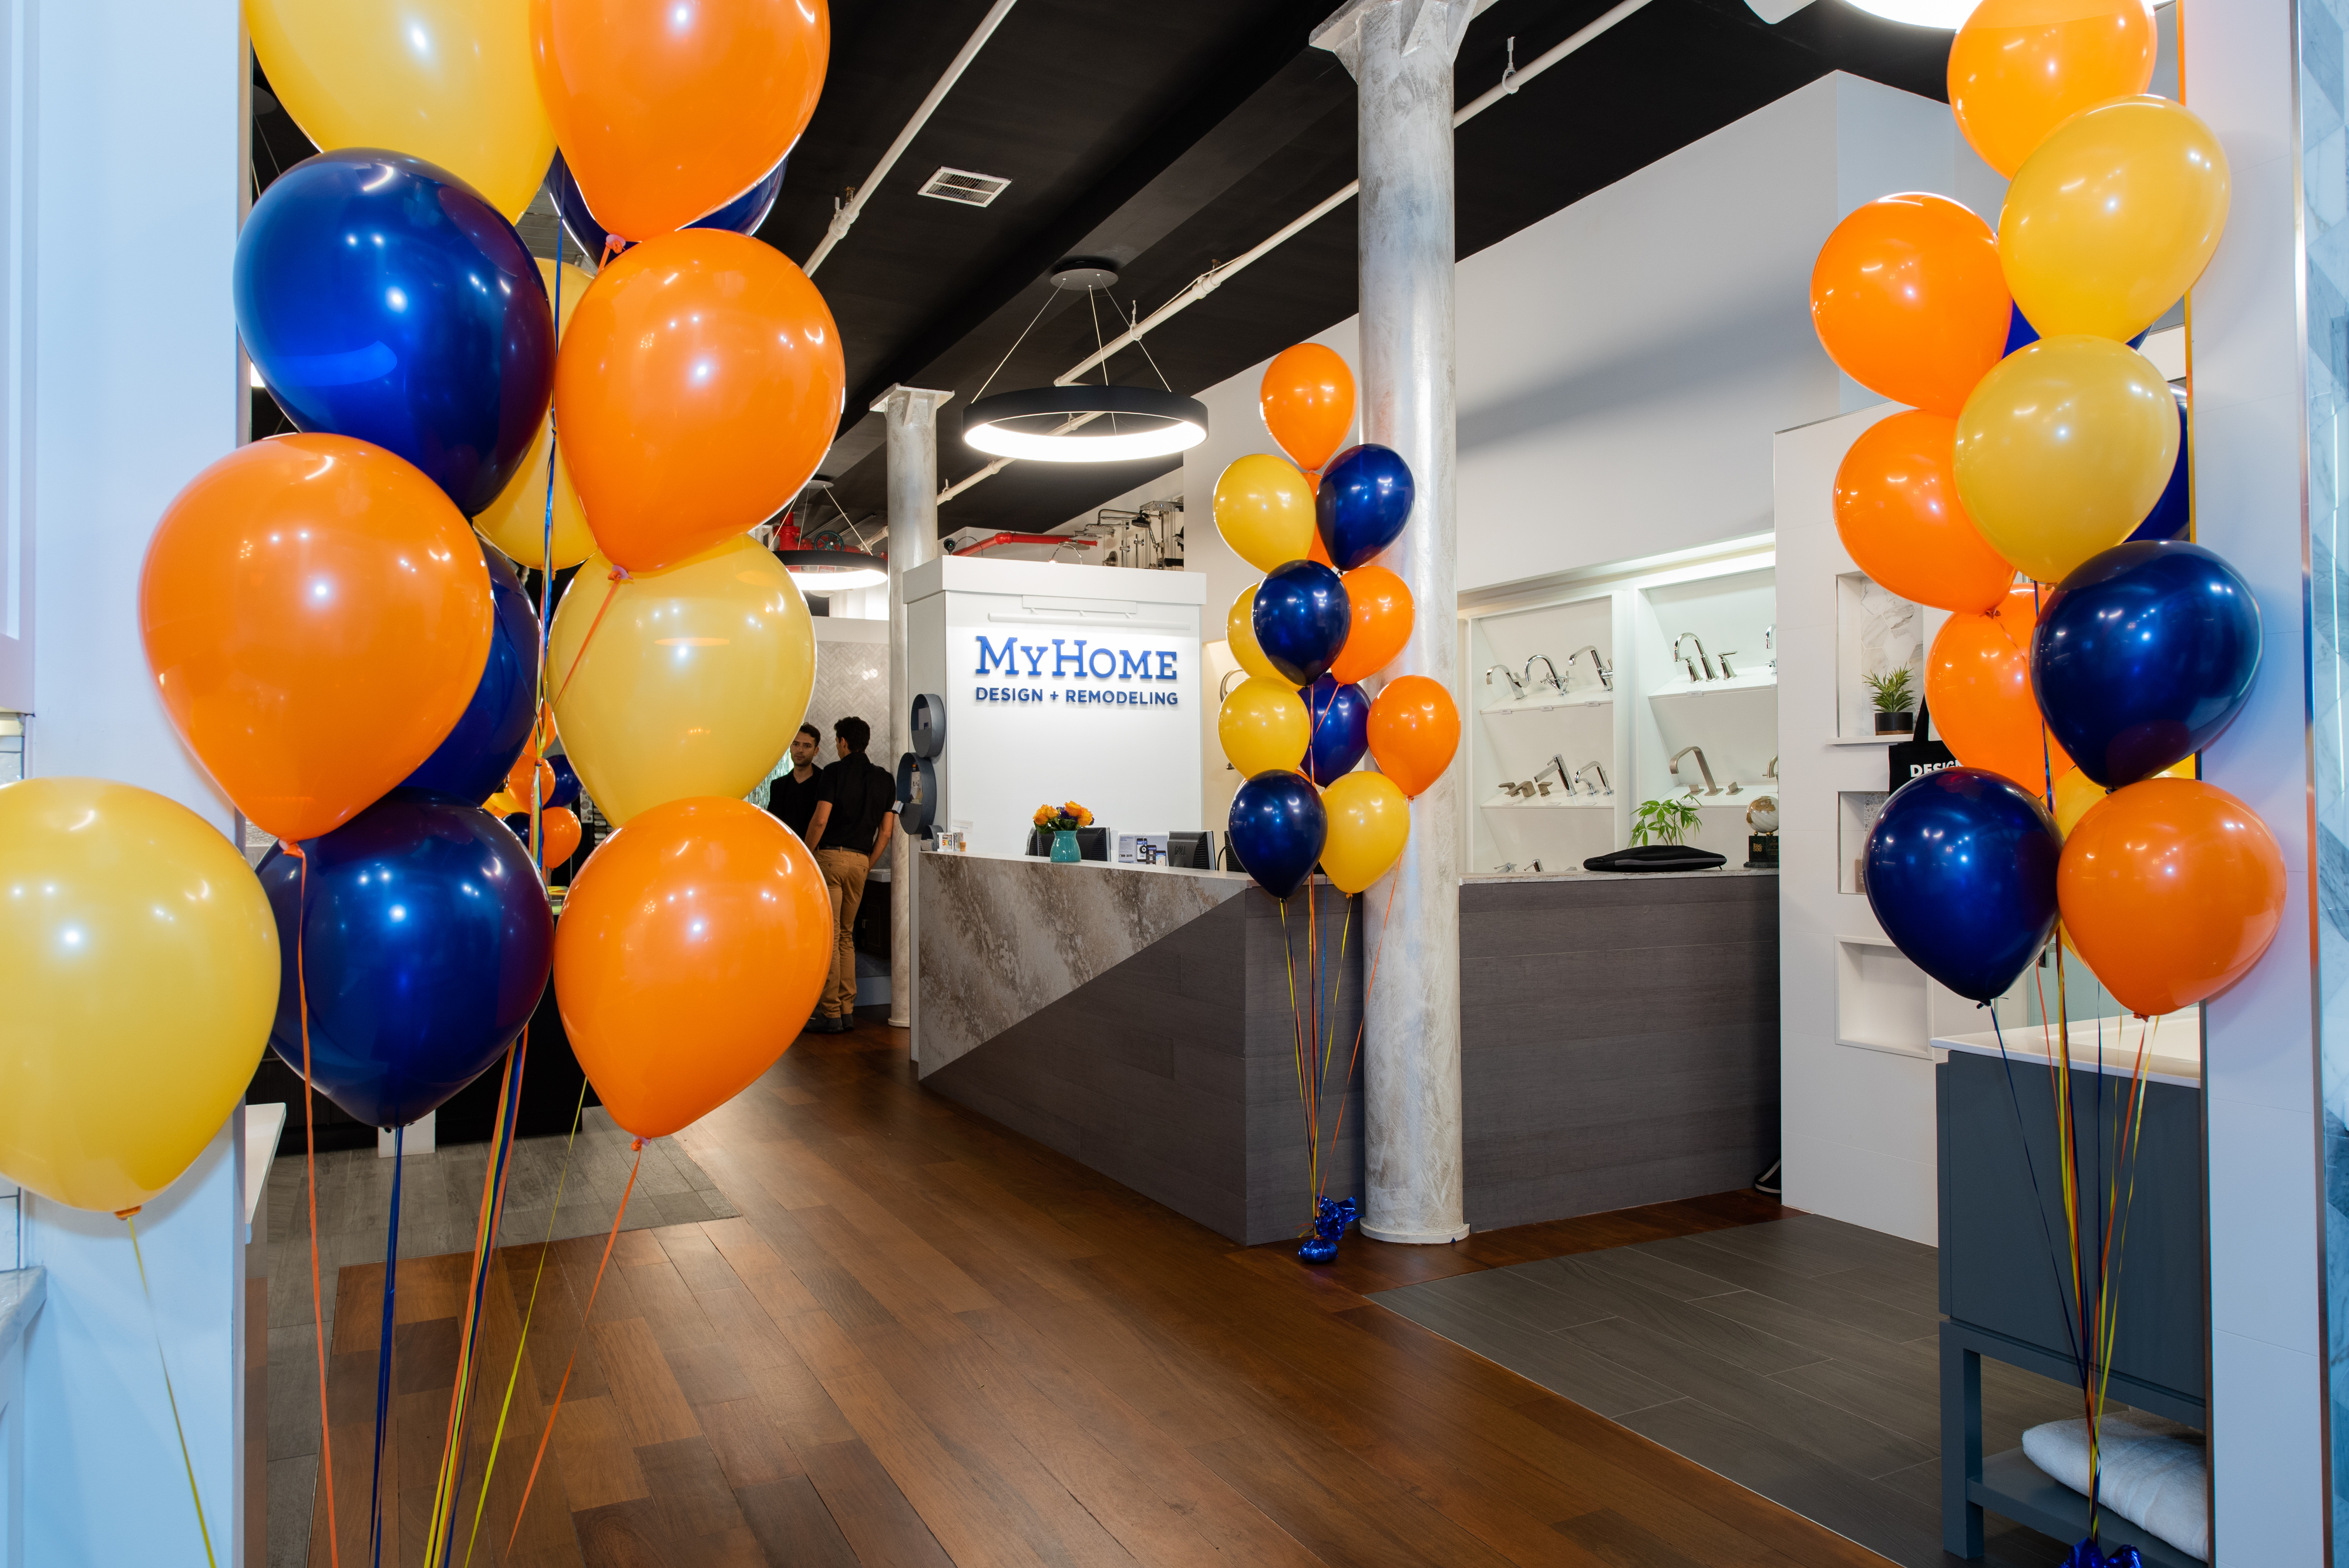 MyHome celebrated the Grand Opening of their kitchen and bath showroom in Manhattan in July.